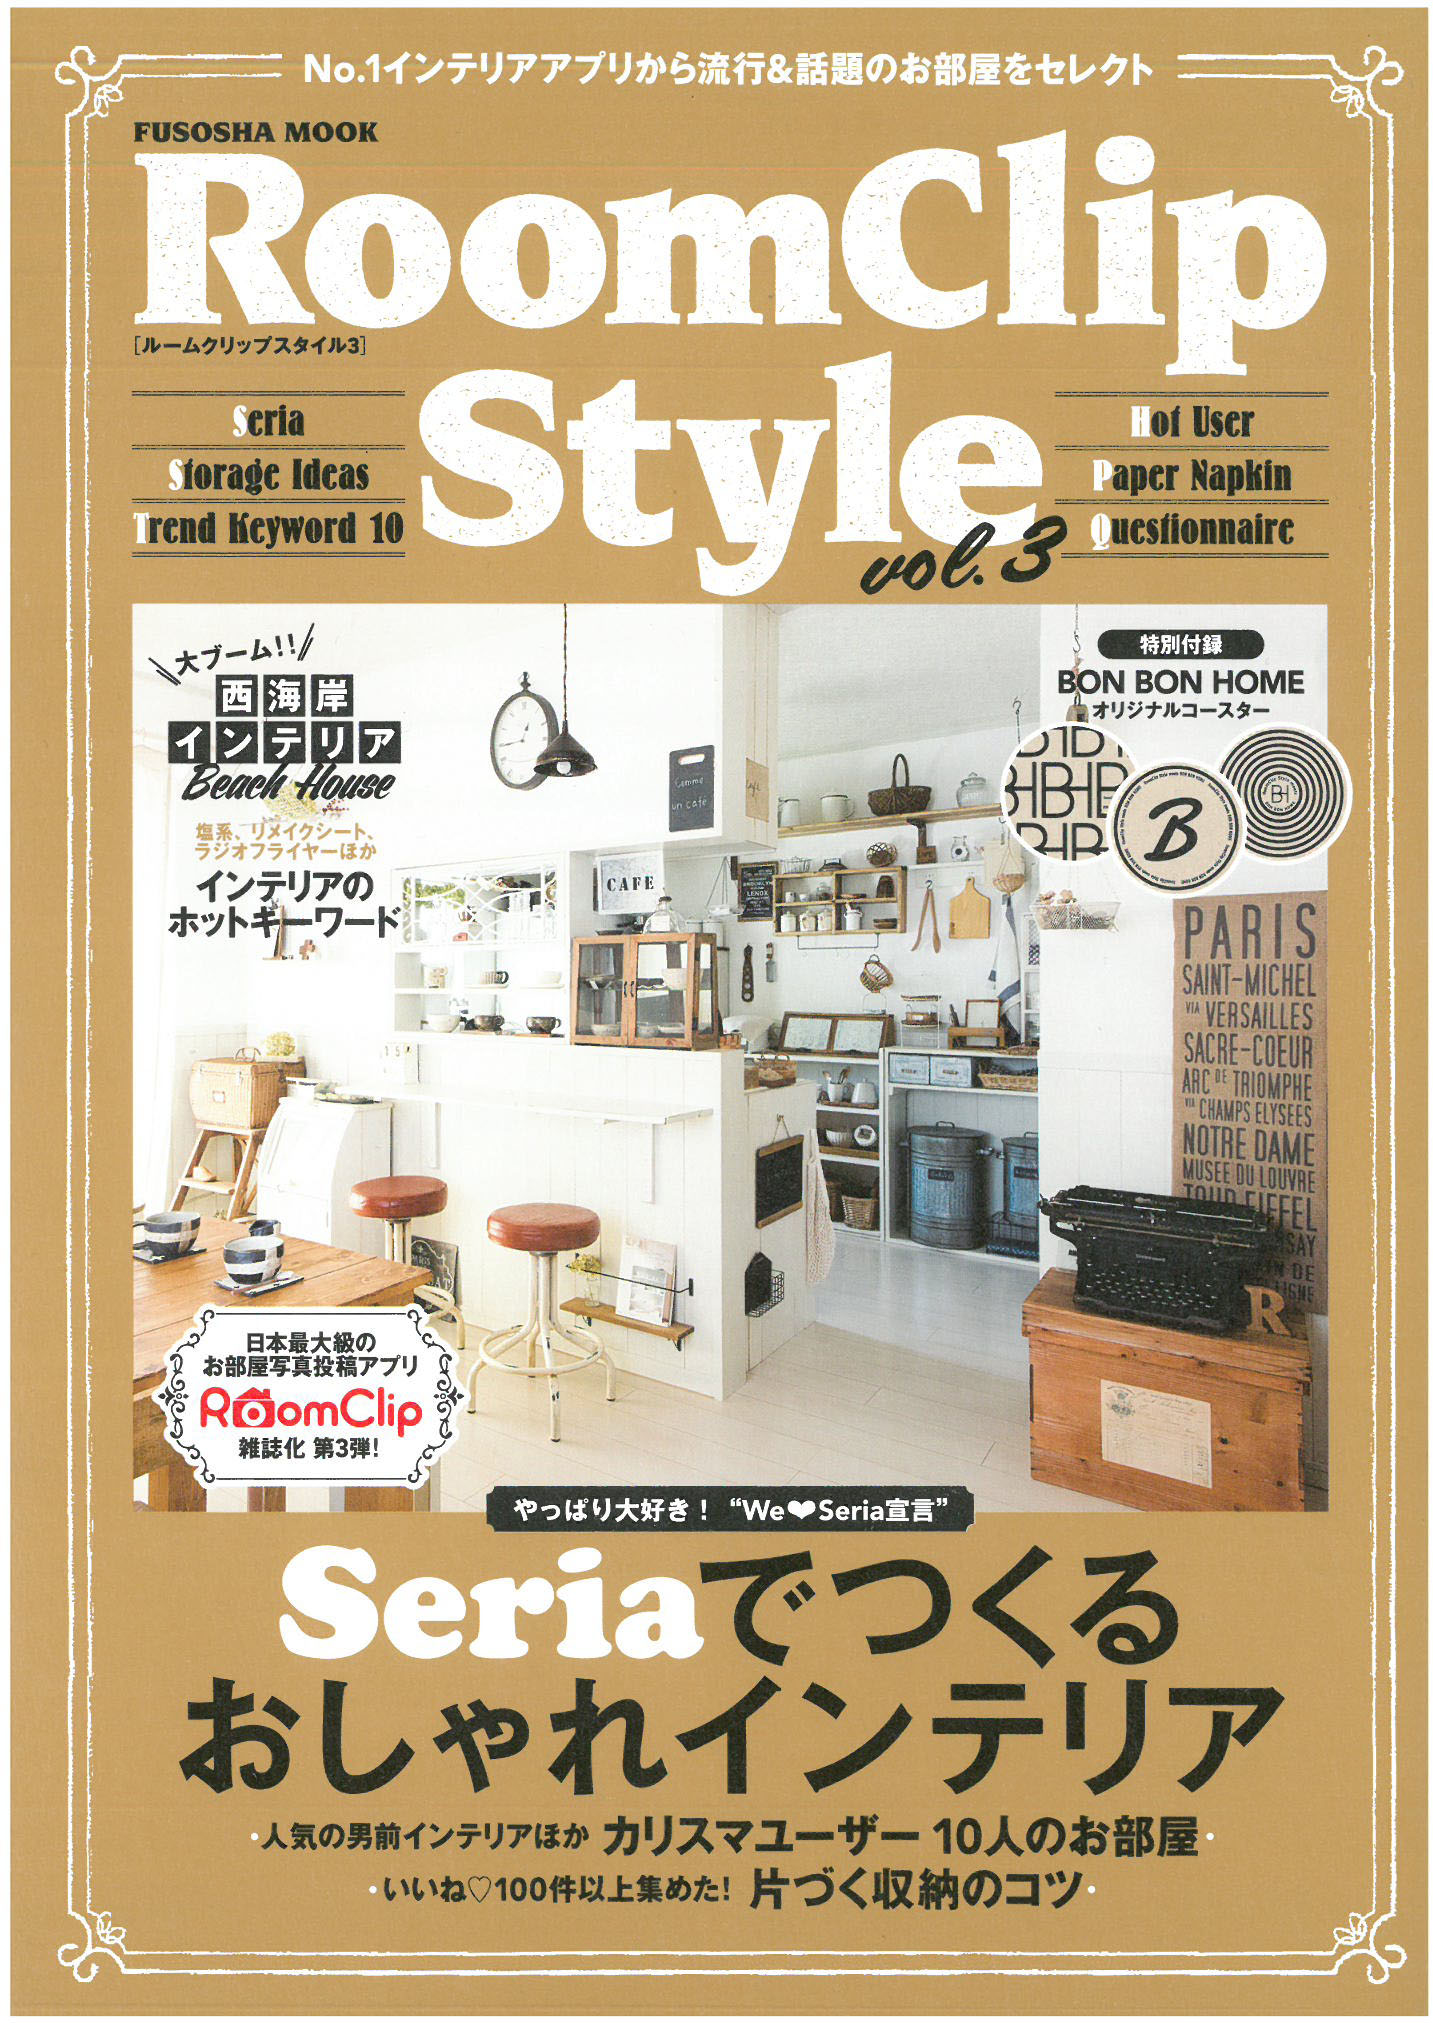 RoomClip Style vol.3